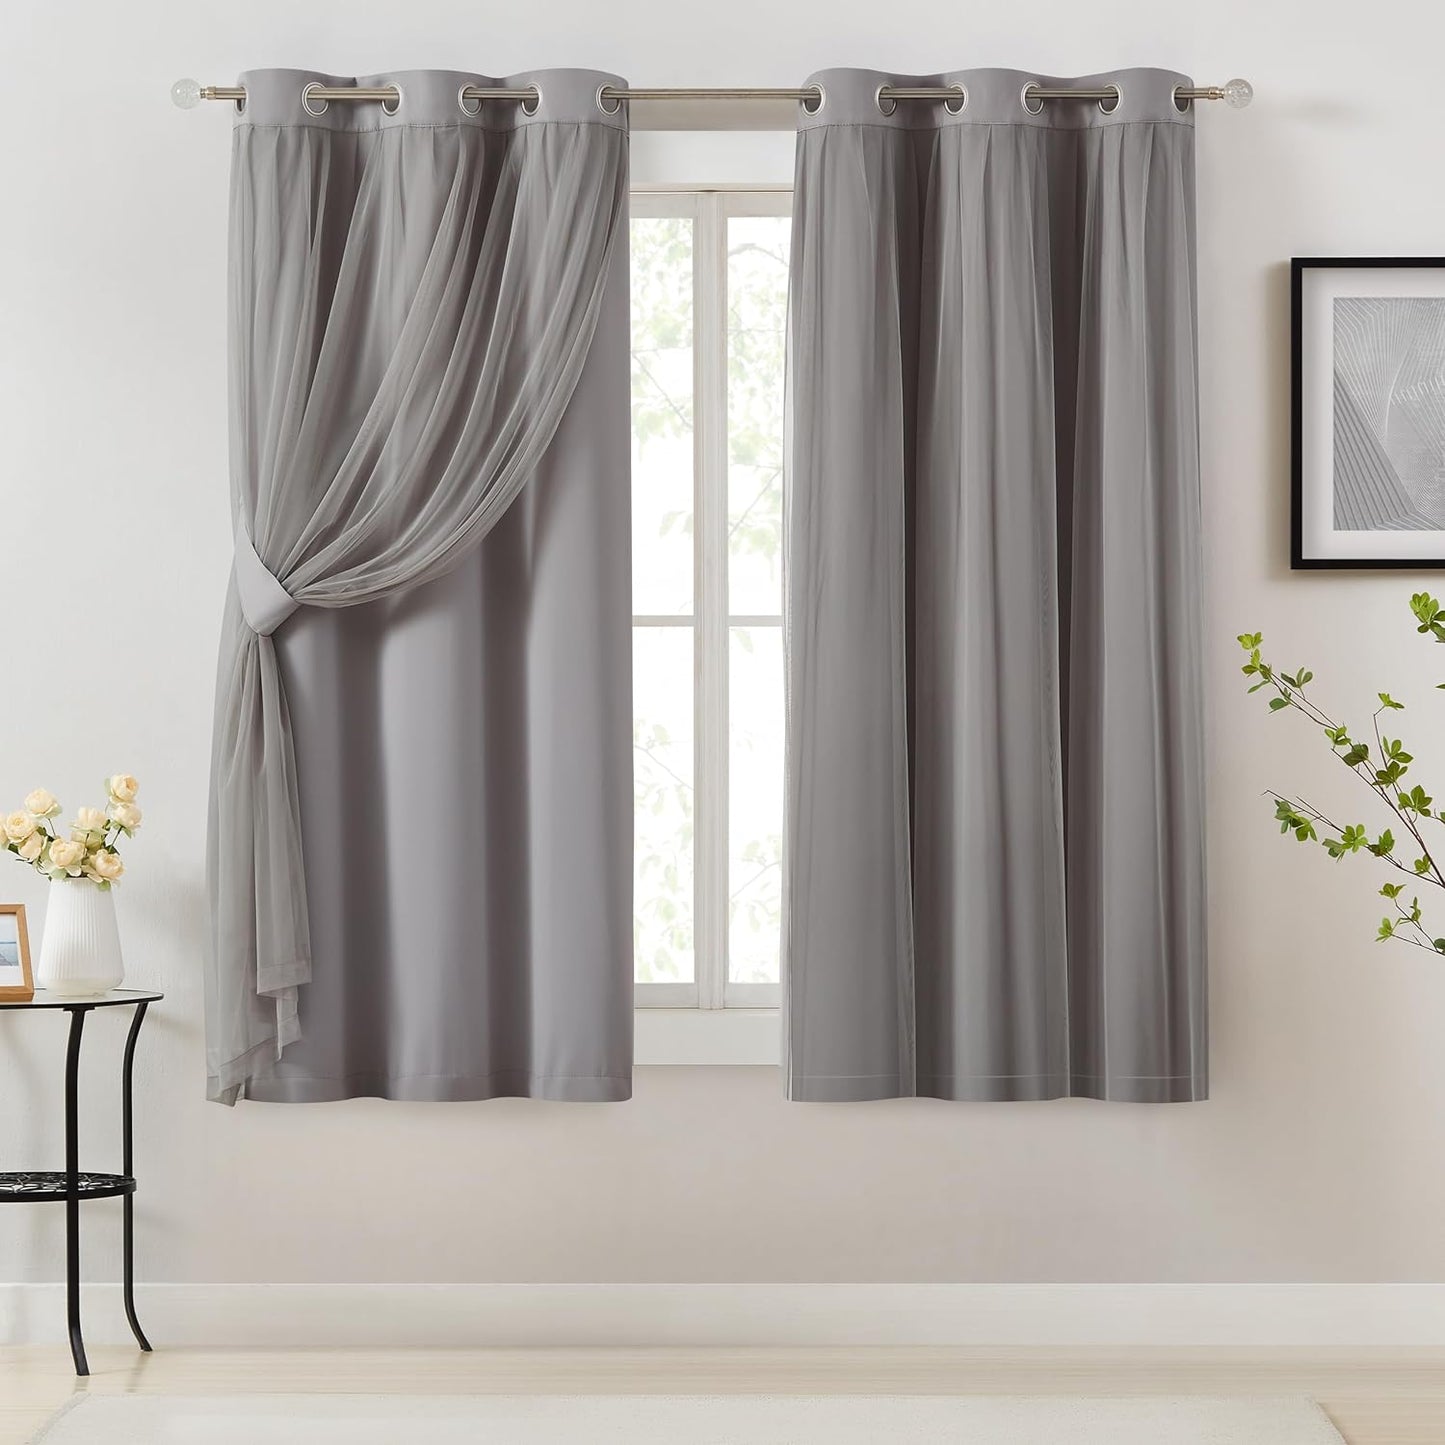 Bujasso Beige 90% Blackout Curtains with Sheer Overlay Mix and Match Double Layer Thermal Insulated Window Panels 84 Inch for Living Room Bedroom Beige Drapes with Tiebacks Grommet Top 37" Wx84 Lx2  Bujasso Grey 37"Wx63"Lx2 